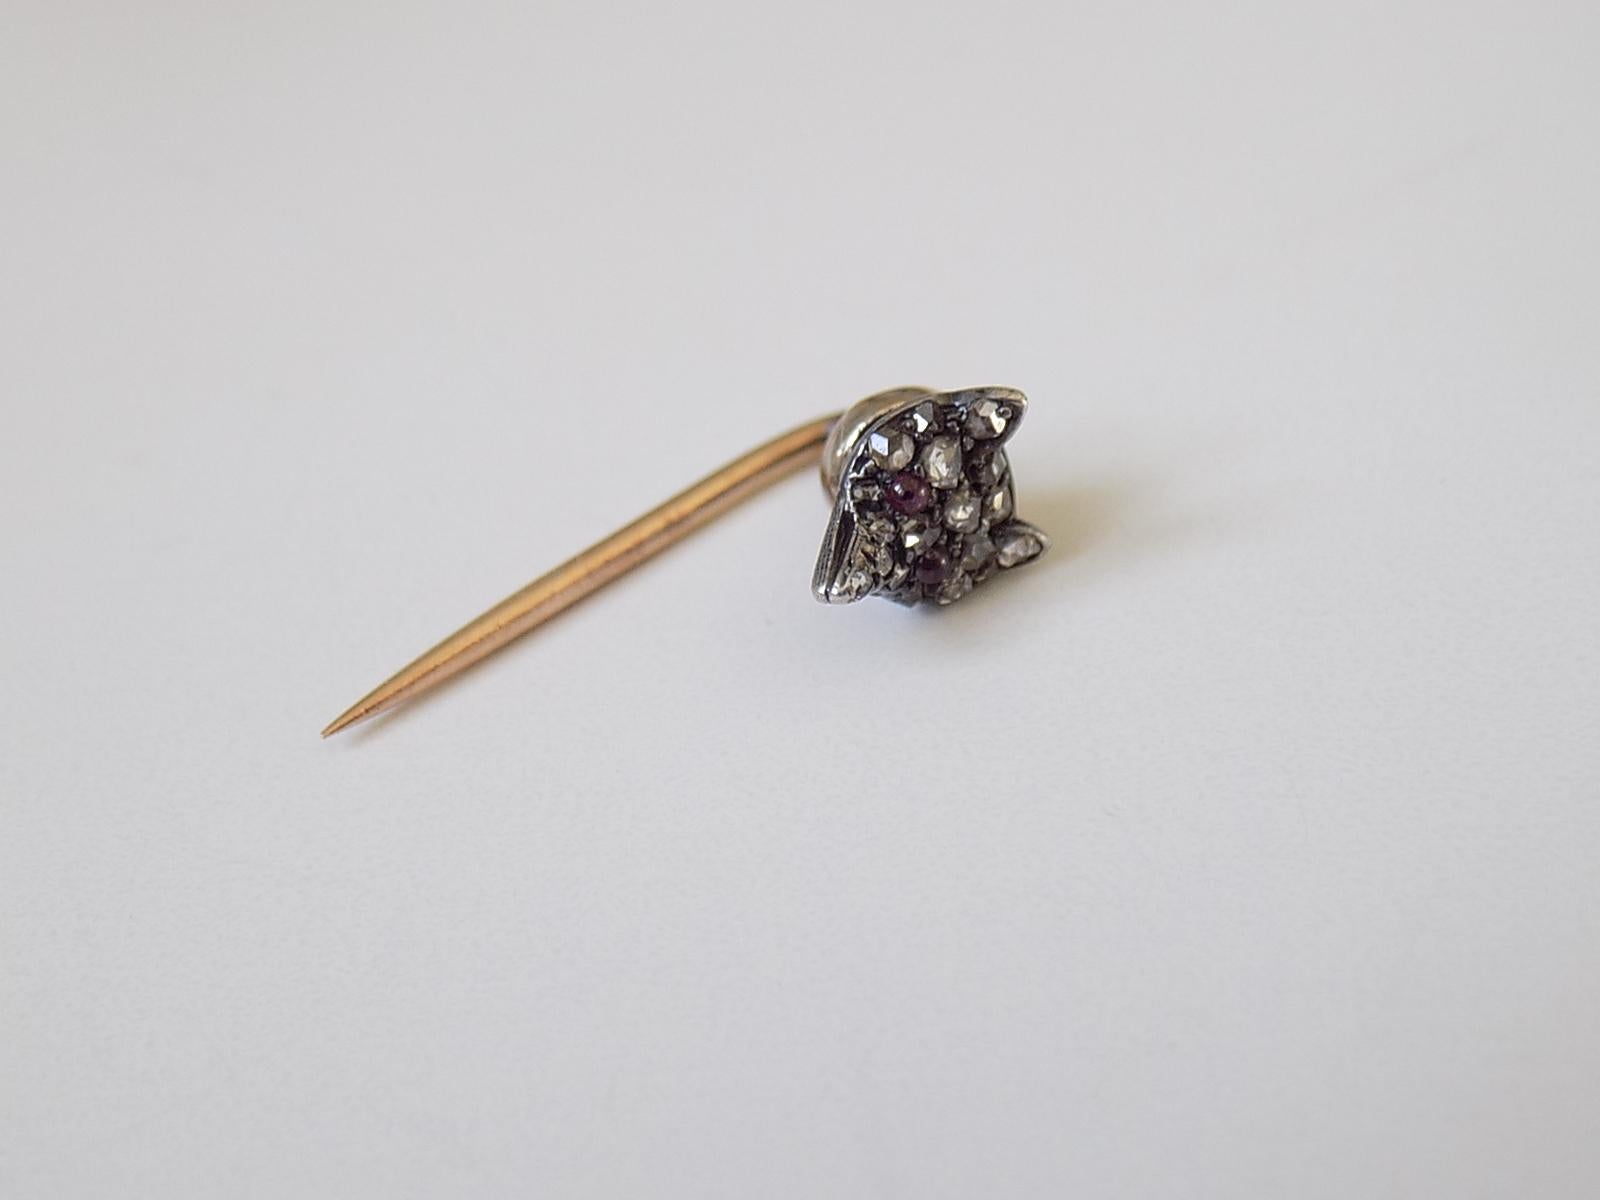 A Victorian c.1890 Rose cut Diamond Fox head Stick Pin or Cravat Pin in Silver and Rose Gold. English origin.
Width of the Fox head 6mm, height 8mm .
Total length of the pin  20mm.
Unmarked.
The pin in good condition for the age, fully complete with